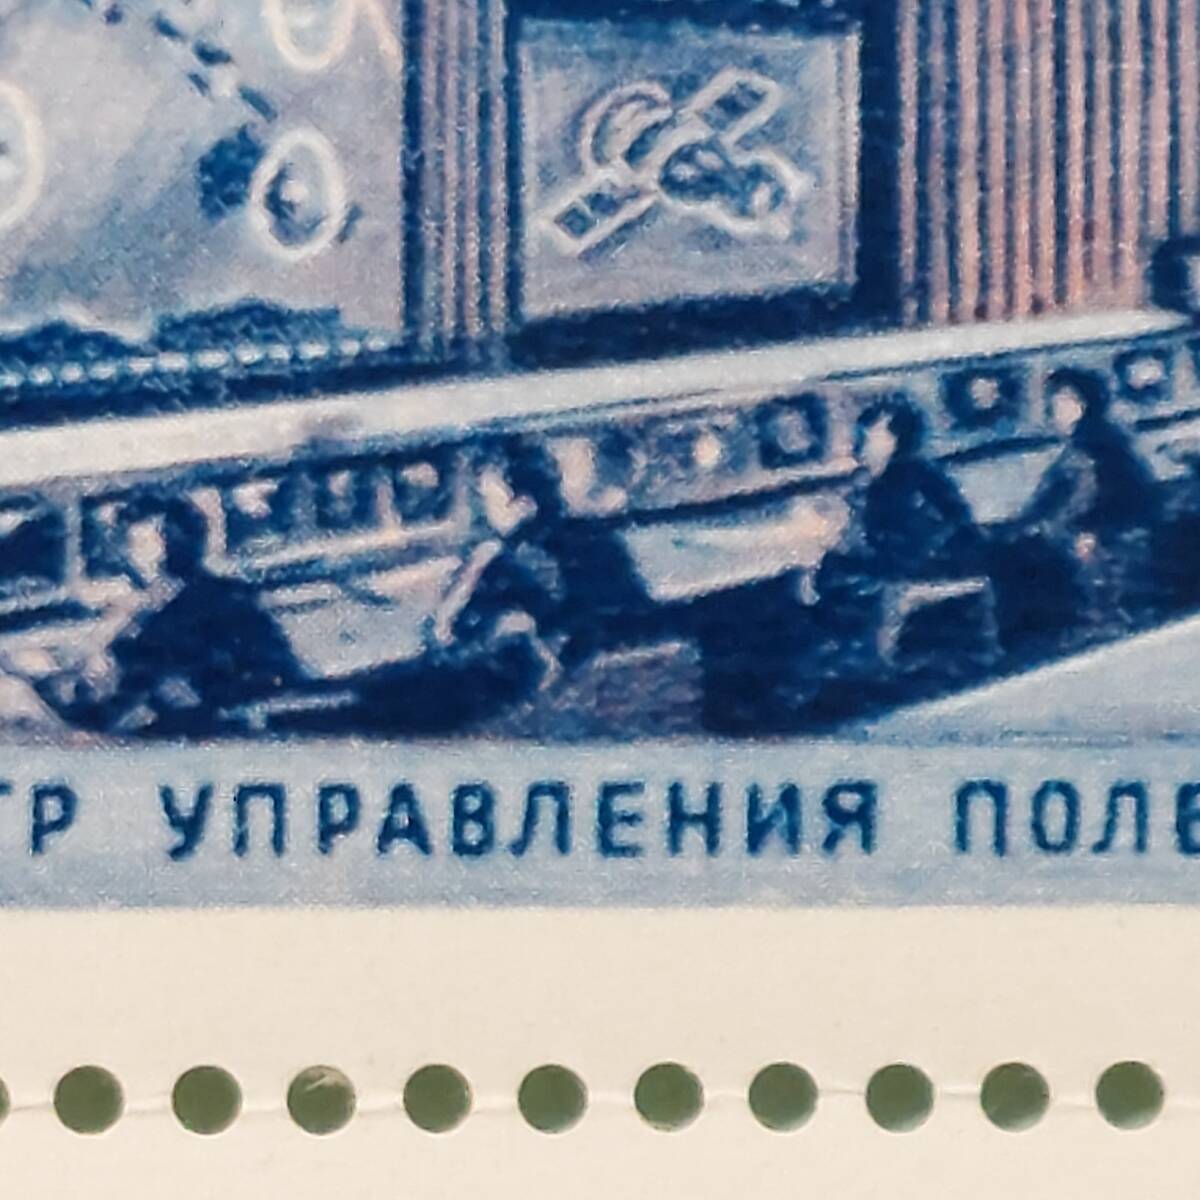 J497so ream stamp [ Apollo *so You z test plan ( America .so ream. space ship . cooperation flight did the first. cosmos plan ) stamp small size seat ]1975 year issue unused 